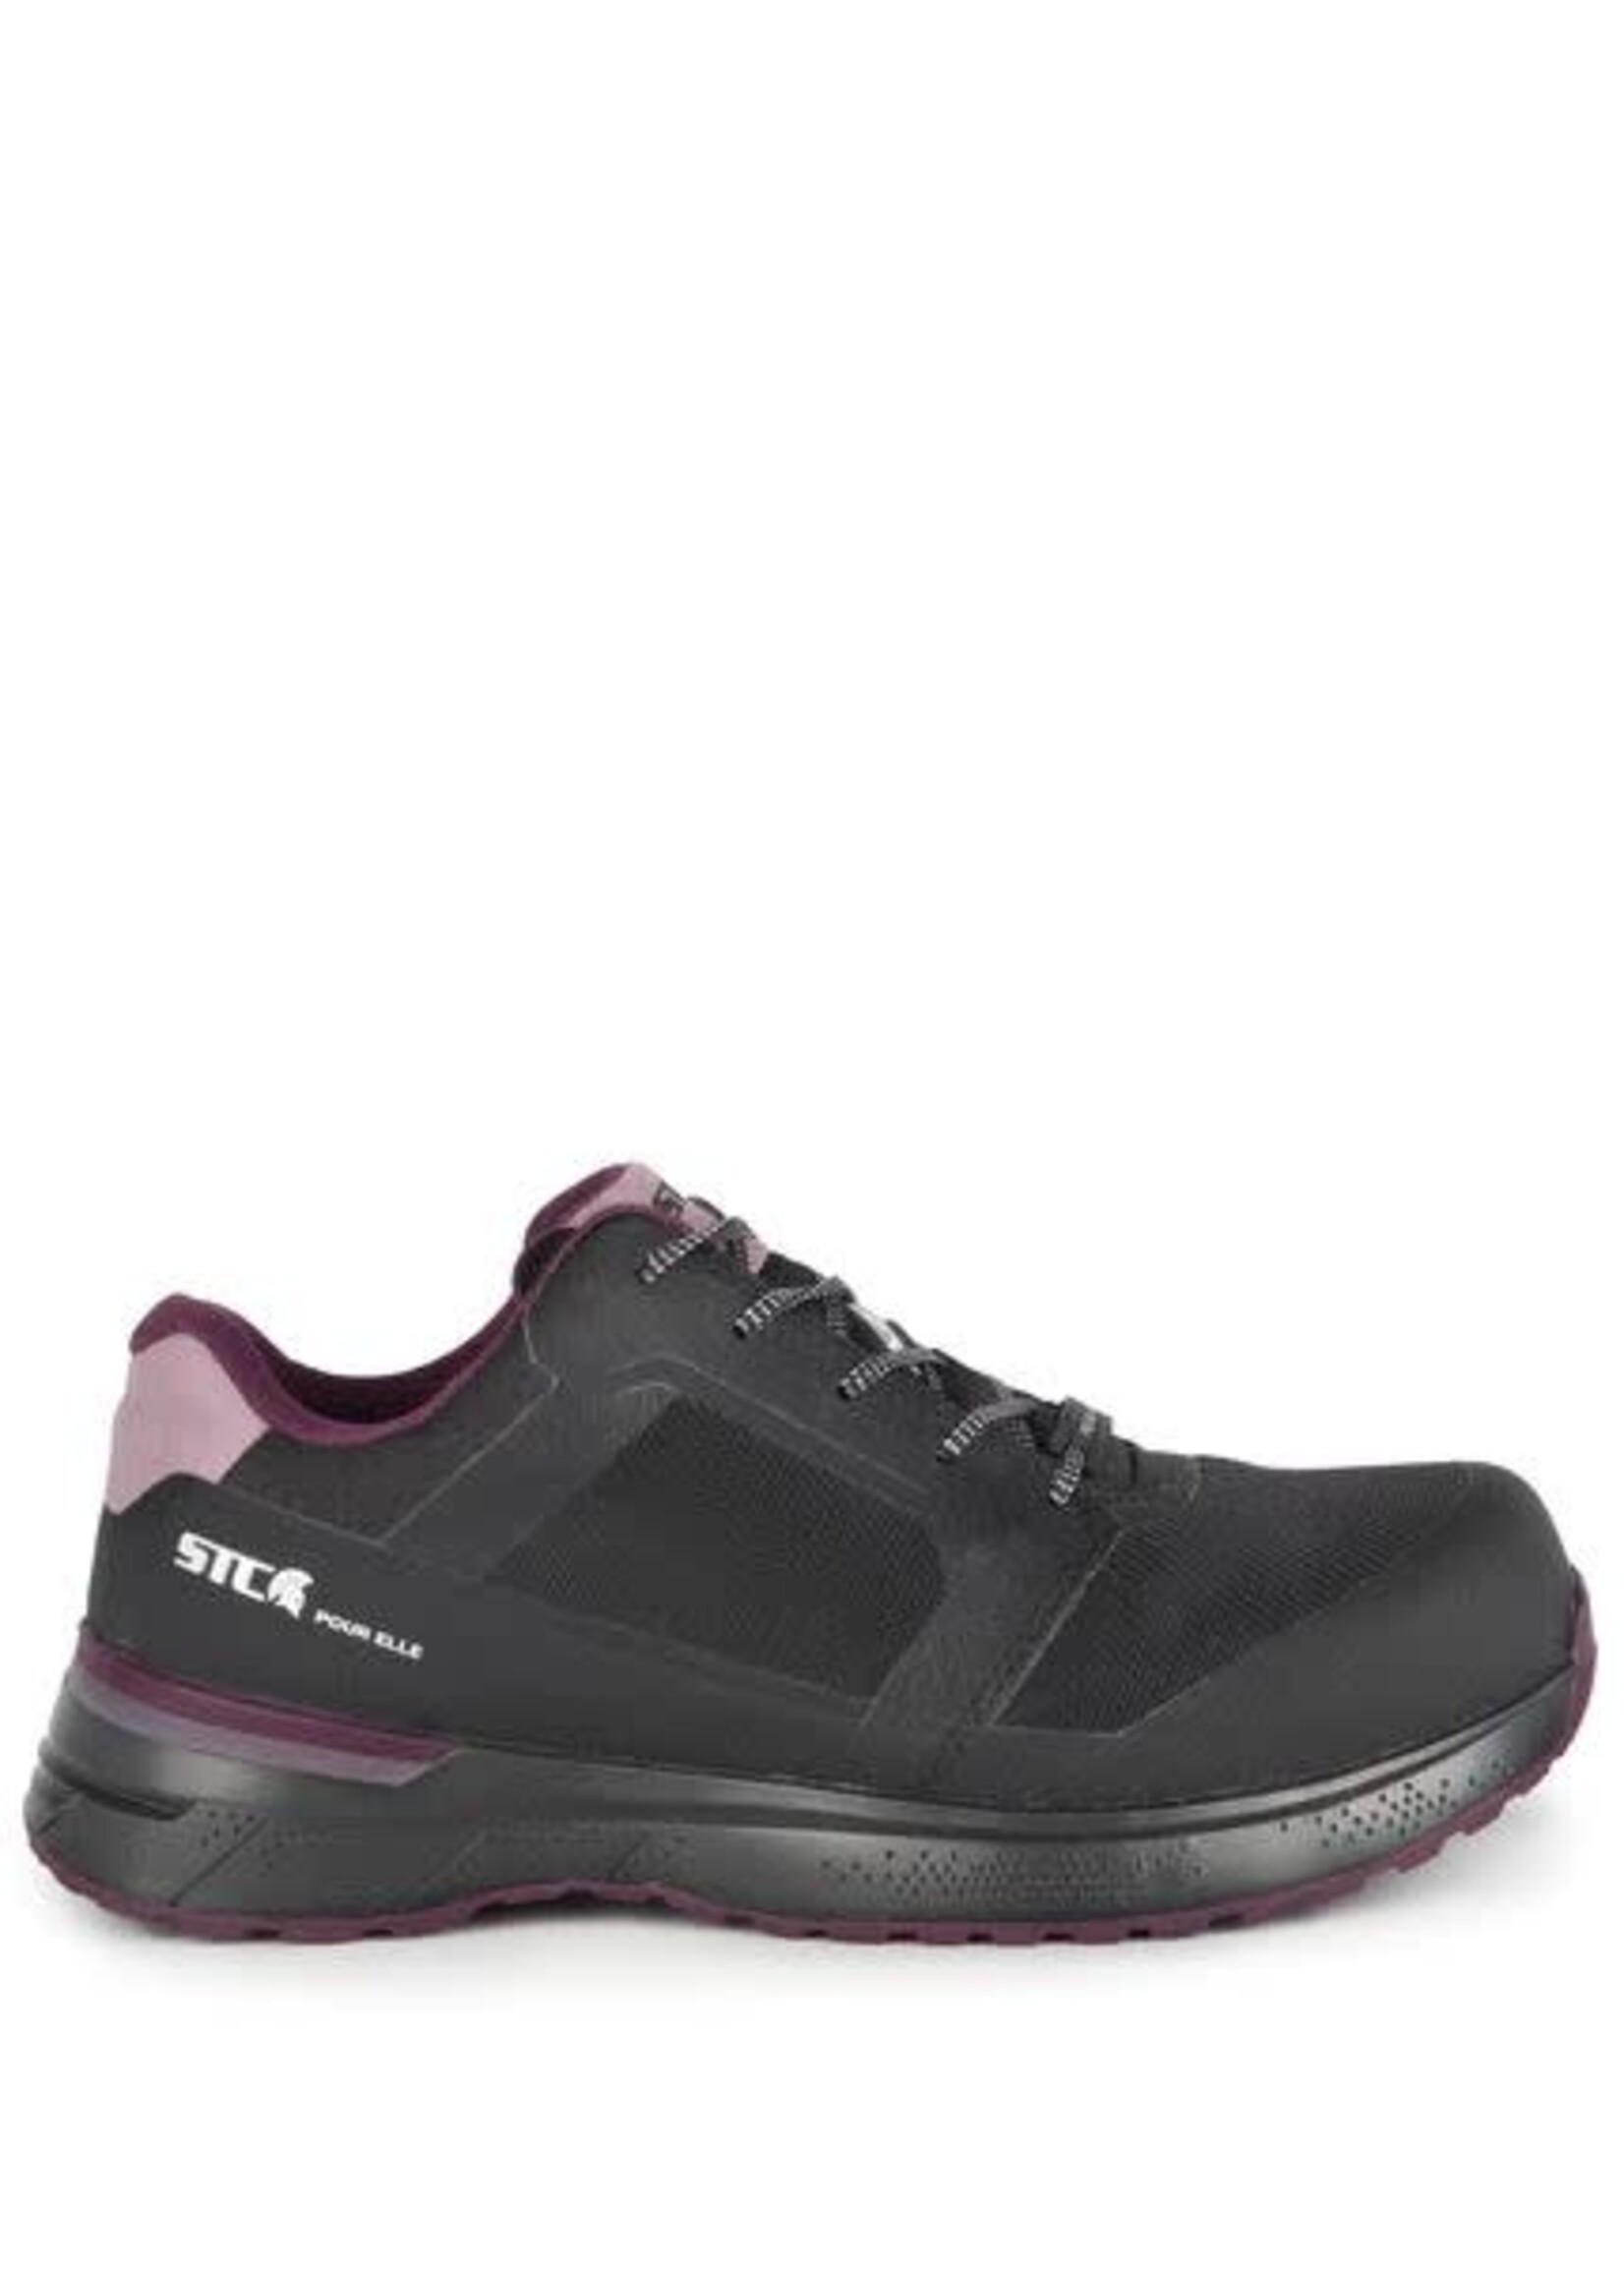 Womens Safety LadyFit, Black – STC Women's Ultra Lightweight Athletic Work  Shoes S29080 -11 - SHOE PLUS - Low Prices - Express Shipping - 100s of  Items to Choose From!